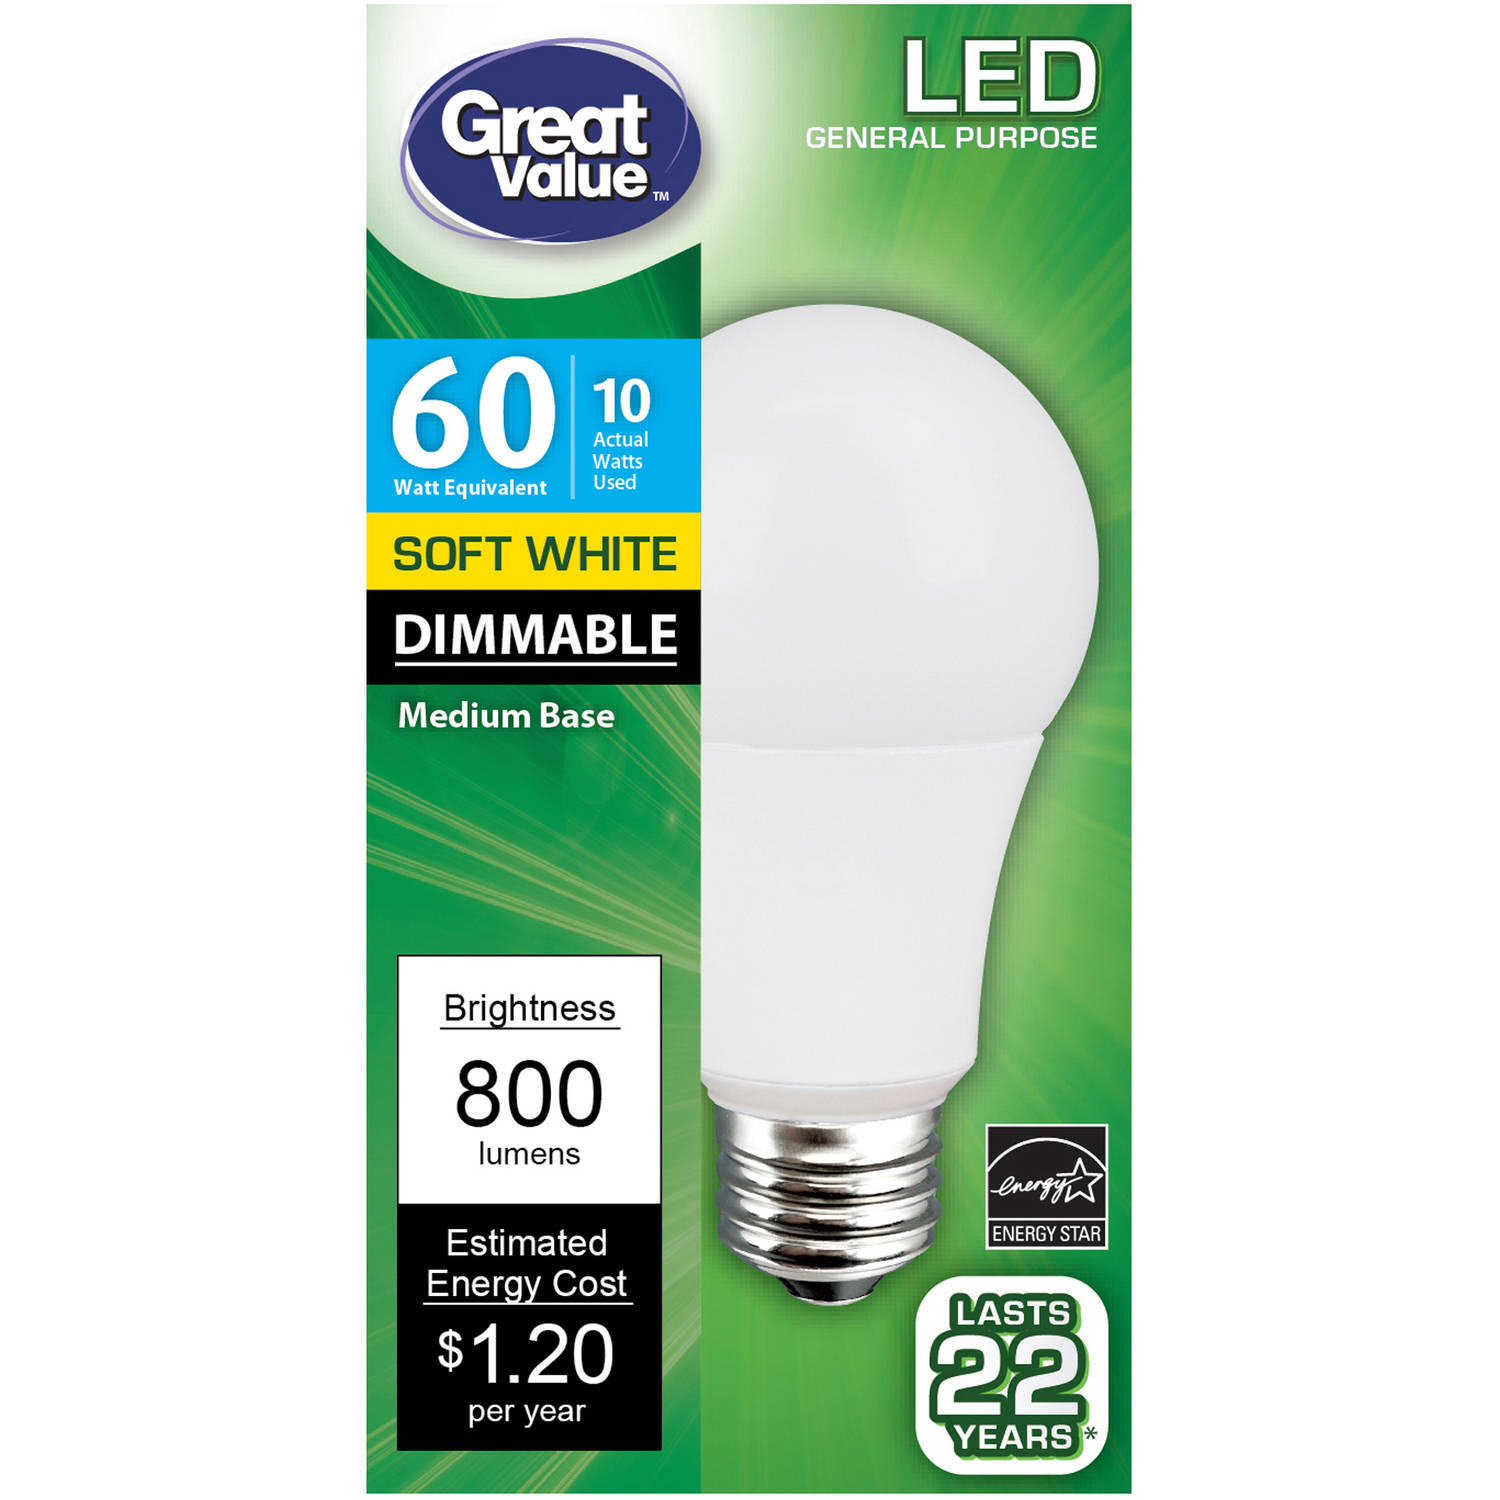 Great Value LED Dimmable A19 (E26) Light Bulb, 10W (60W Equivalent), Soft White - image 1 of 5